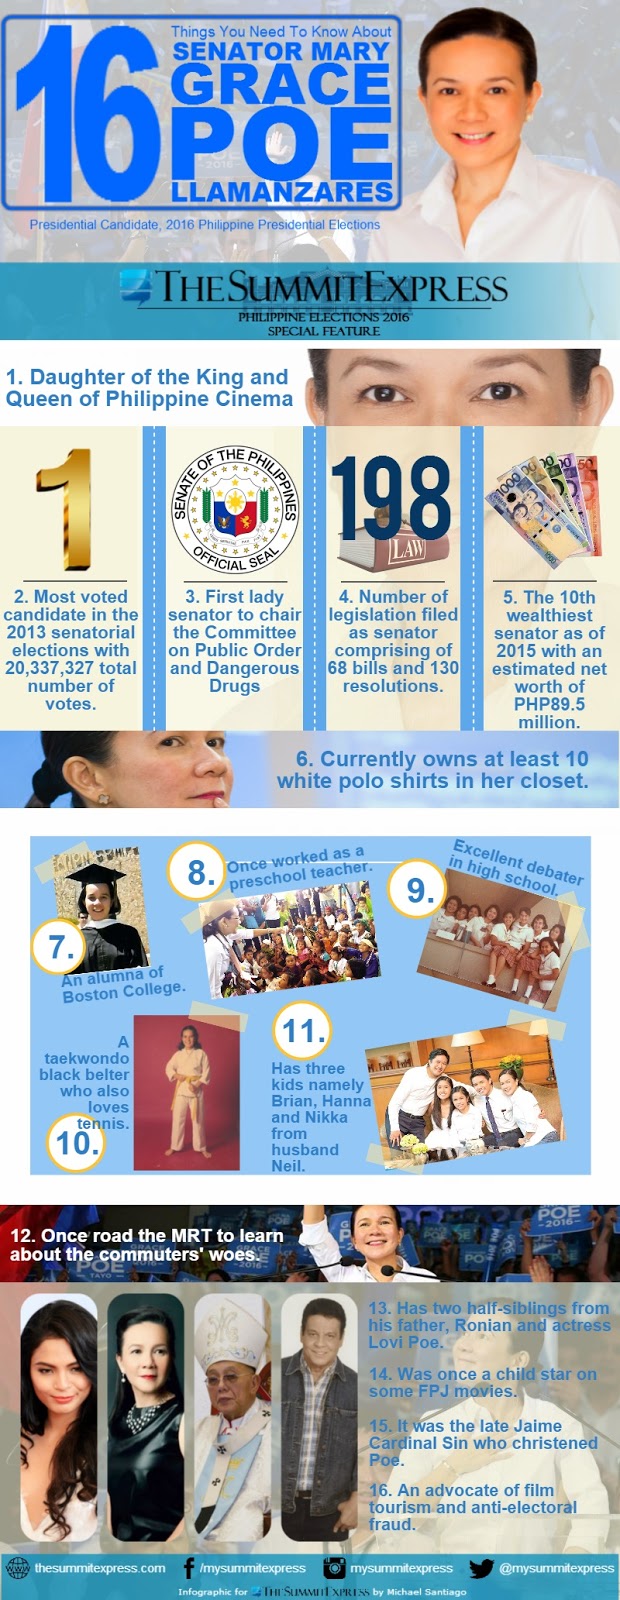 Presidential Candidate Grace Poe: 16 Things You Need To Know (Infographic)